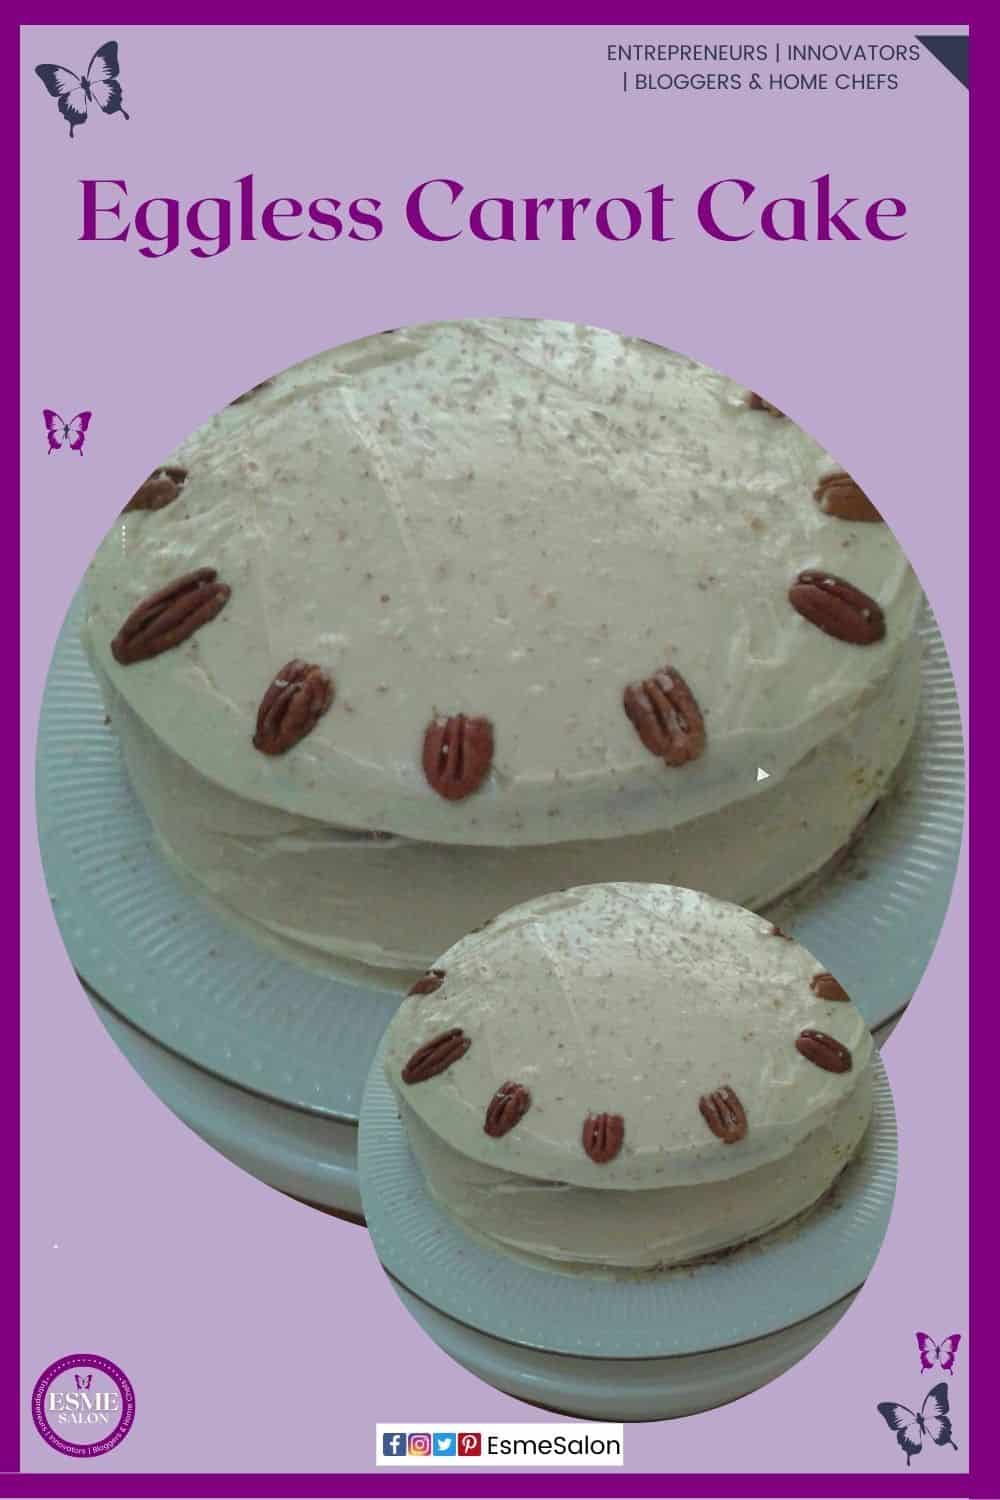 an image of a round Eggless Carrot Cake with pecan nuts